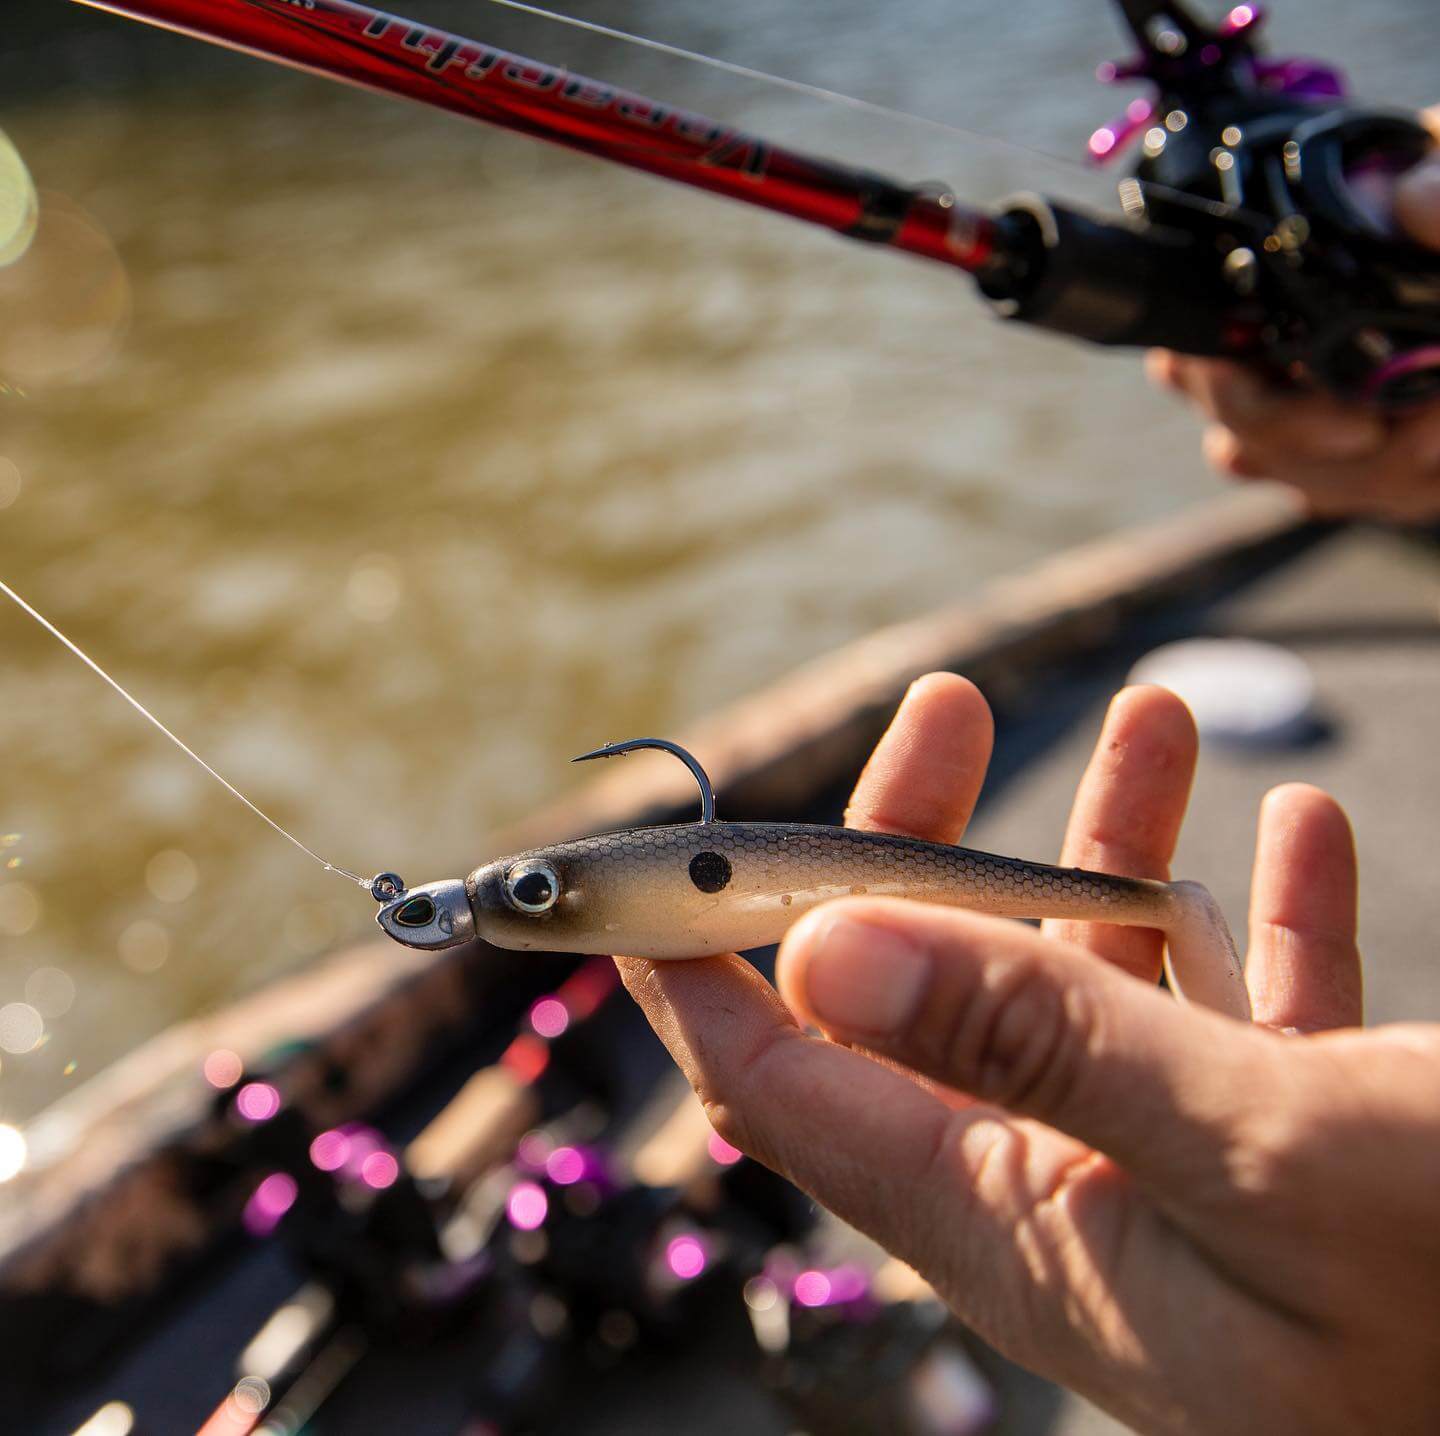 Test and opinions on the brand's fishing lures Berkley - Leurre de la pêche